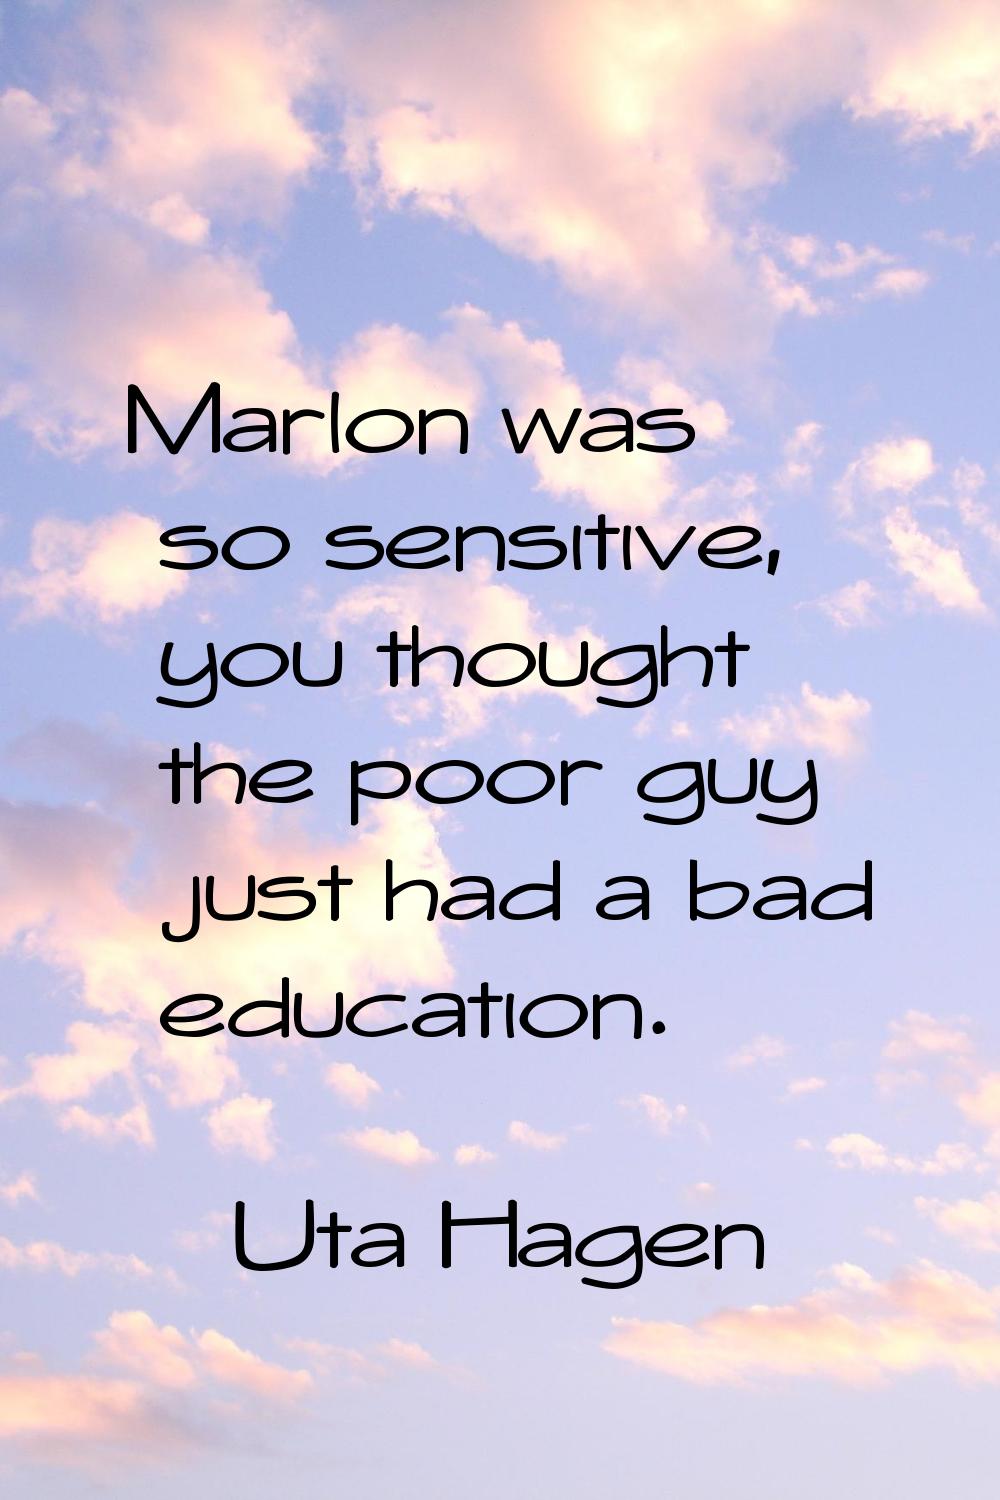 Marlon was so sensitive, you thought the poor guy just had a bad education.